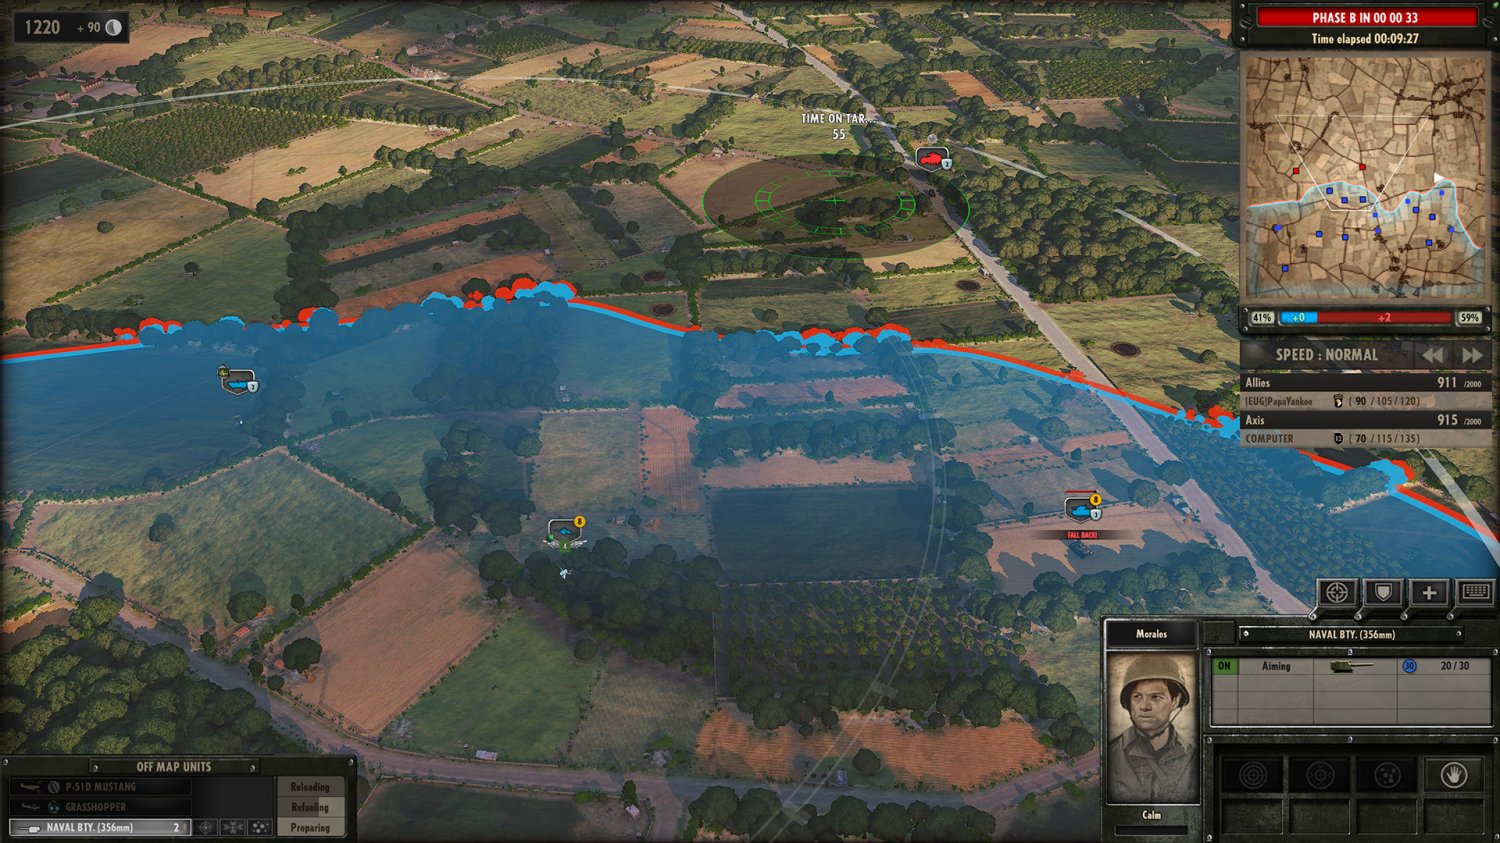 steel division normandy 44 pc download